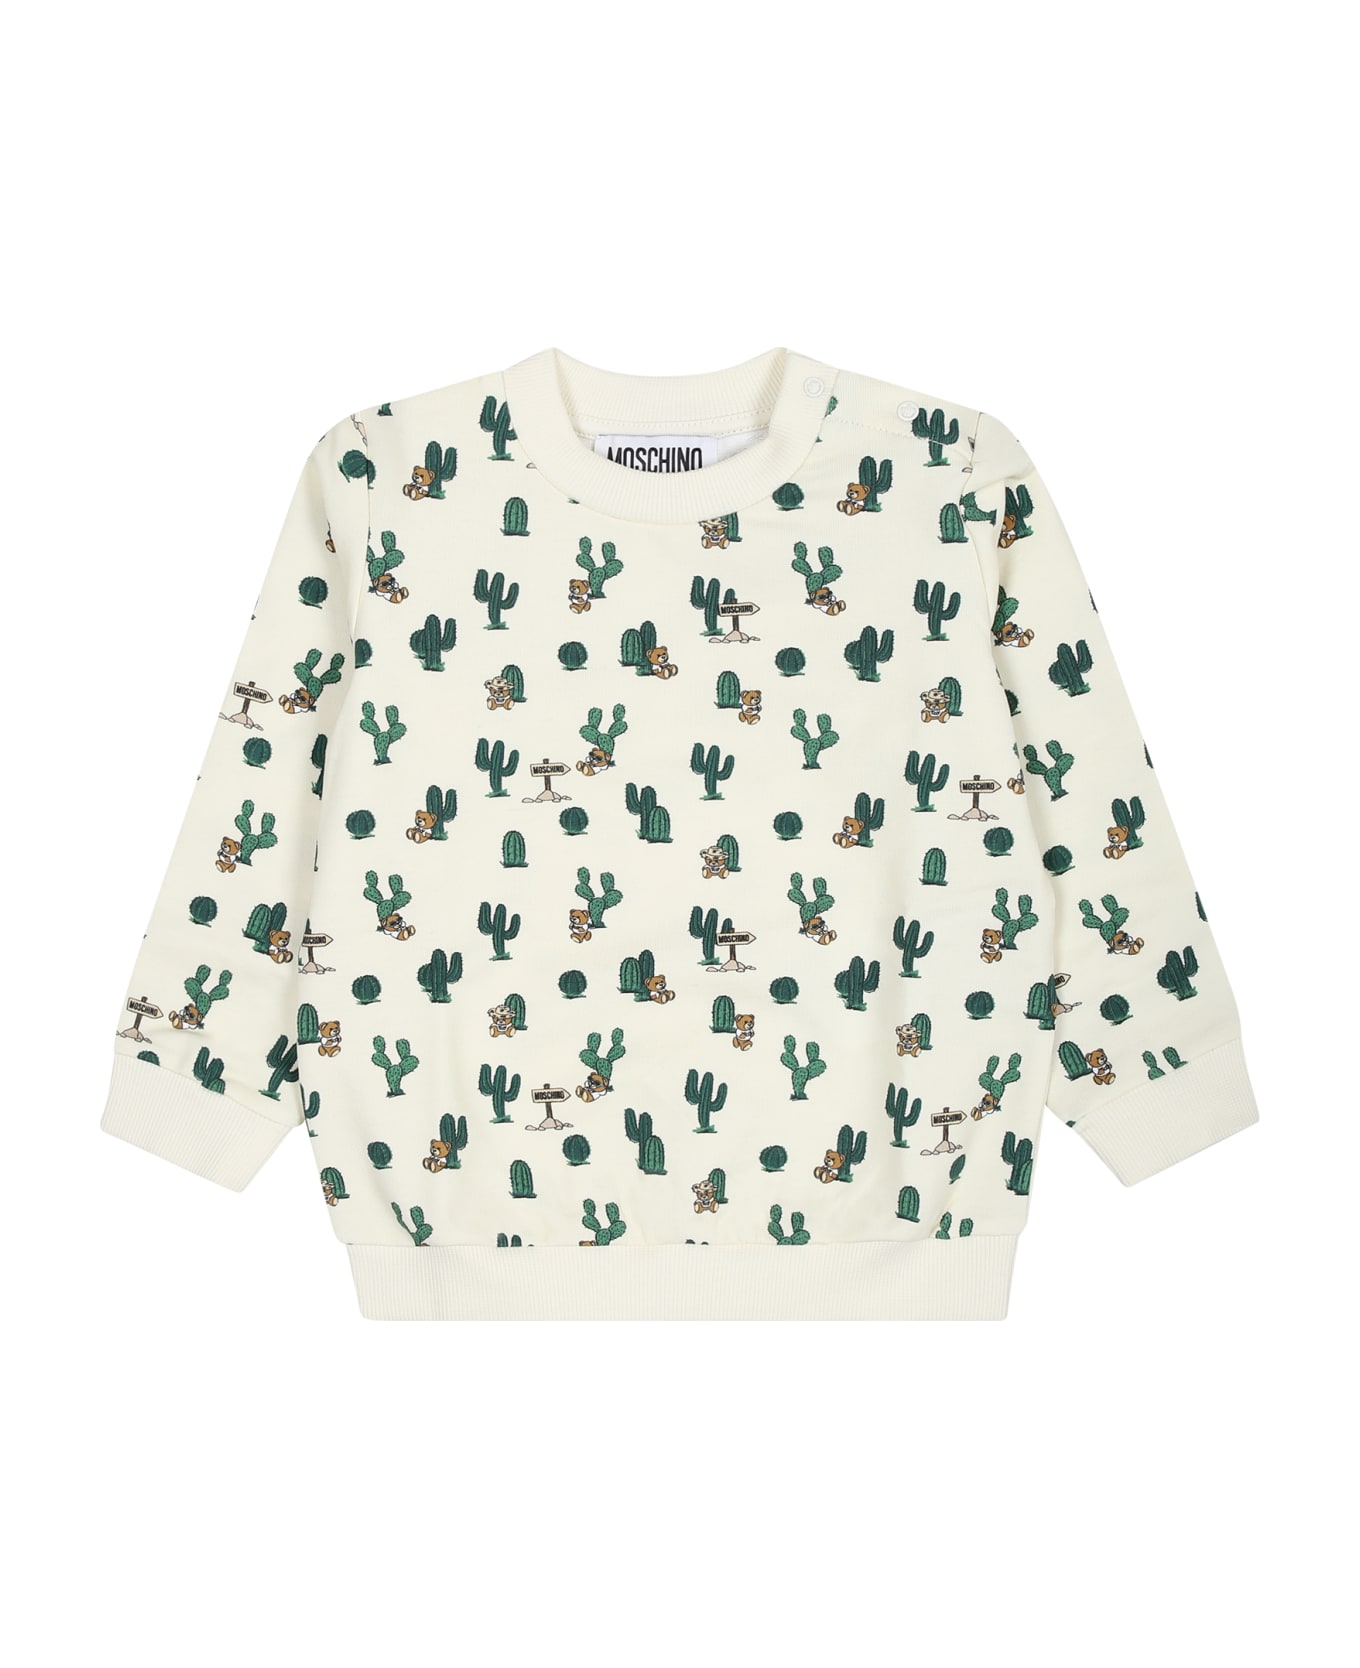 Moschino Ivory Sweatshirt For Baby Boy With Teddy Bear And Cactus - Ivory